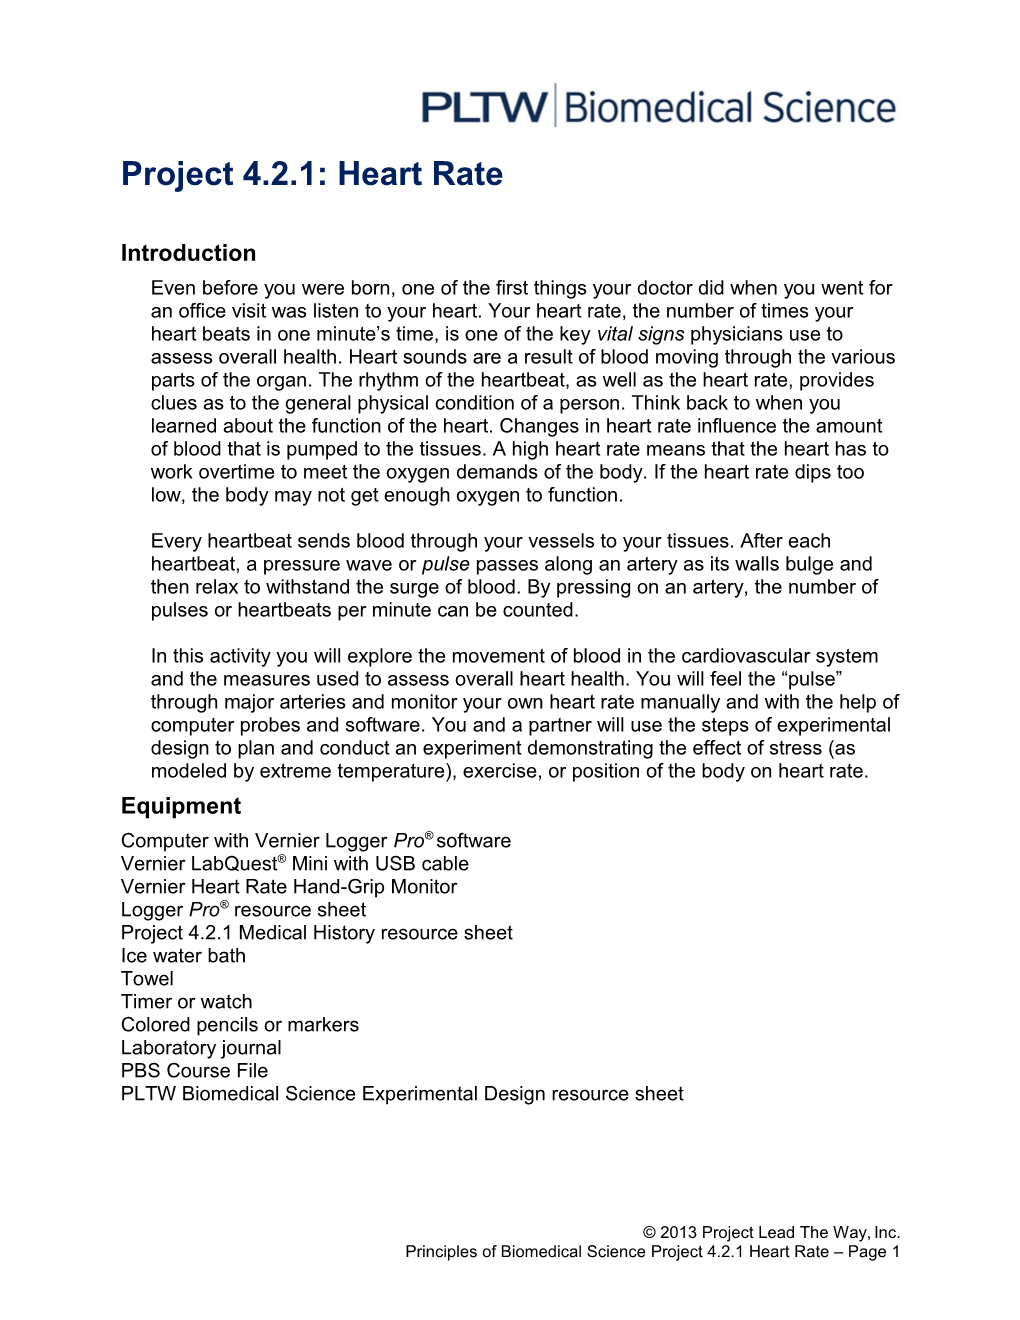 Project 4.2.1: Heart Rate